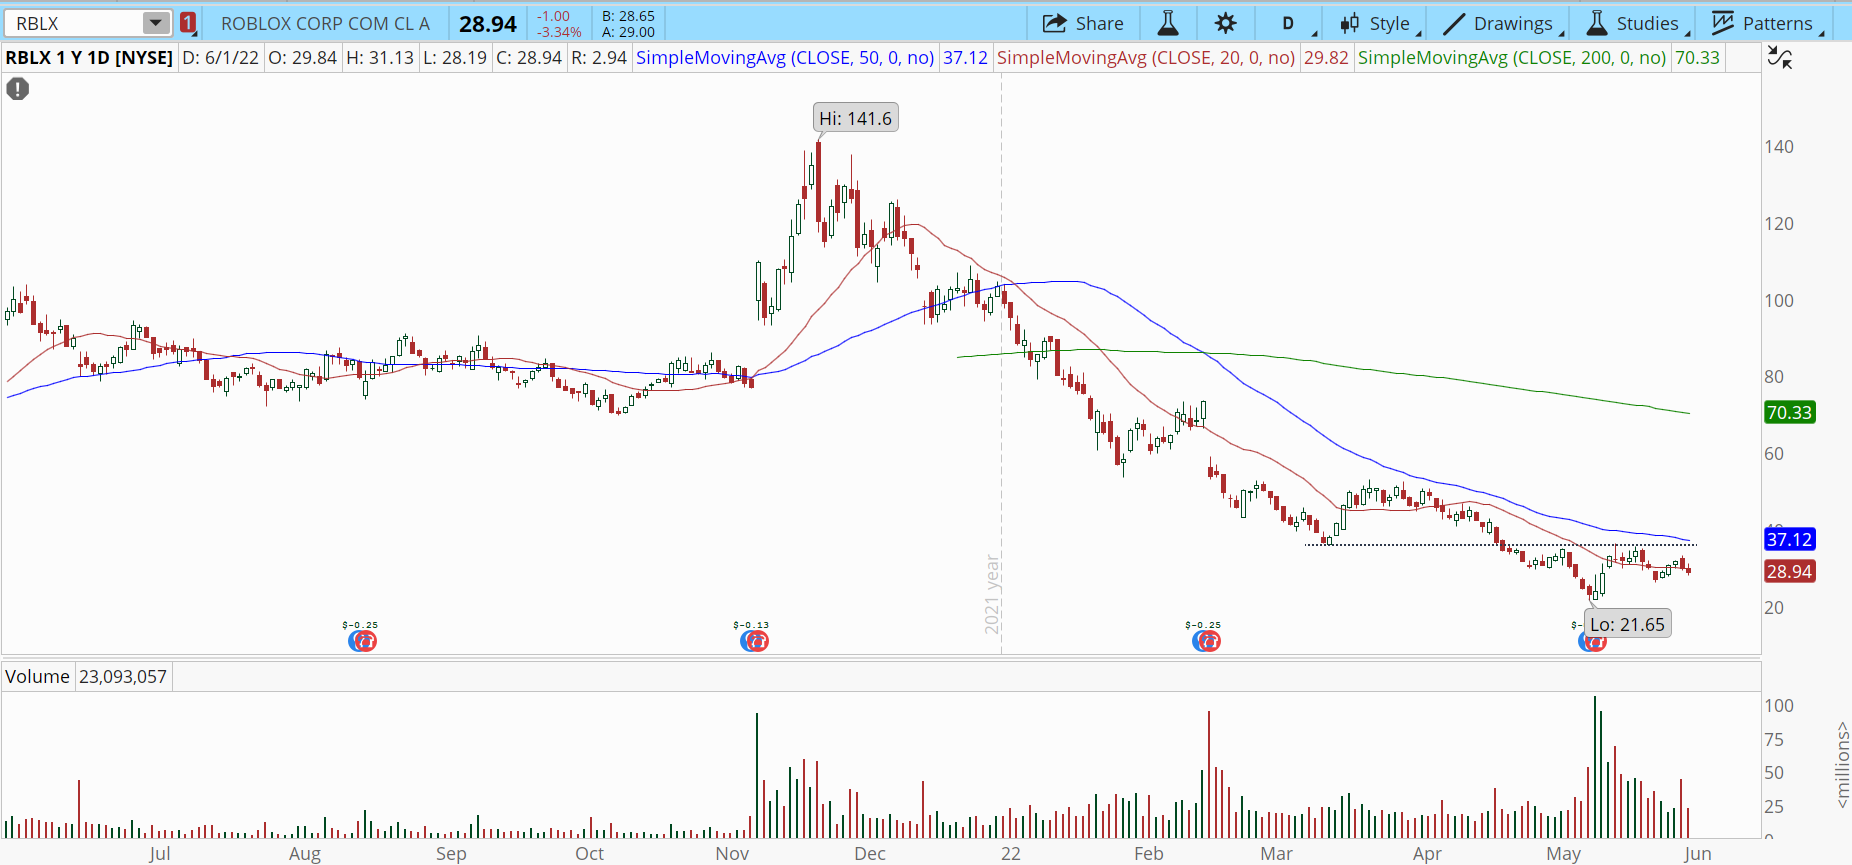 Roblox (RBLX) stock chart with long-term downtrend.